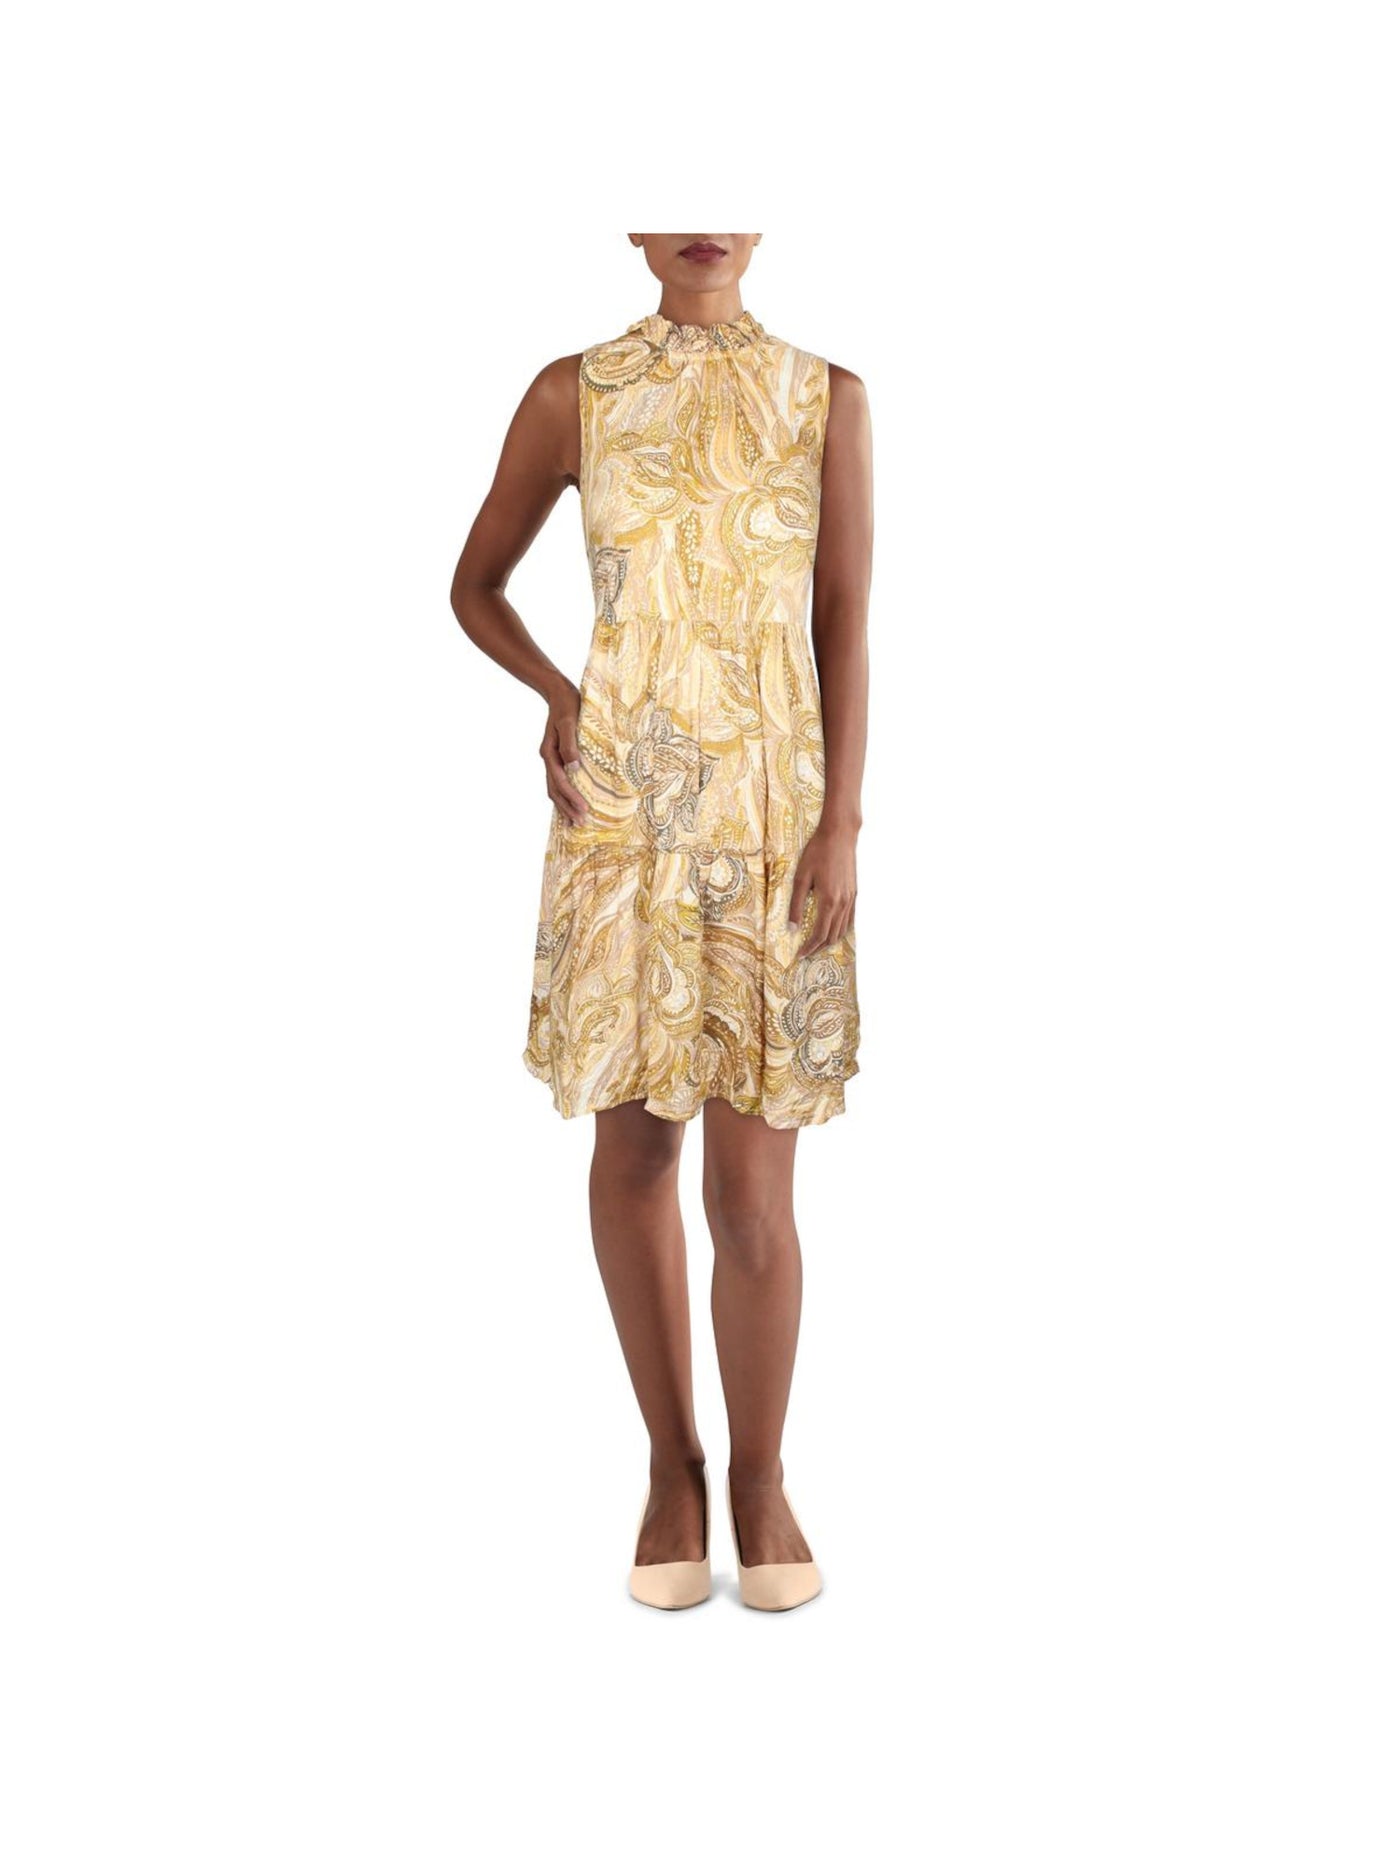 CALVIN KLEIN Womens Yellow Ruffled Unlined Keyhole Back Tiered Printed Sleeveless Mock Neck Above The Knee Shift Dress 10